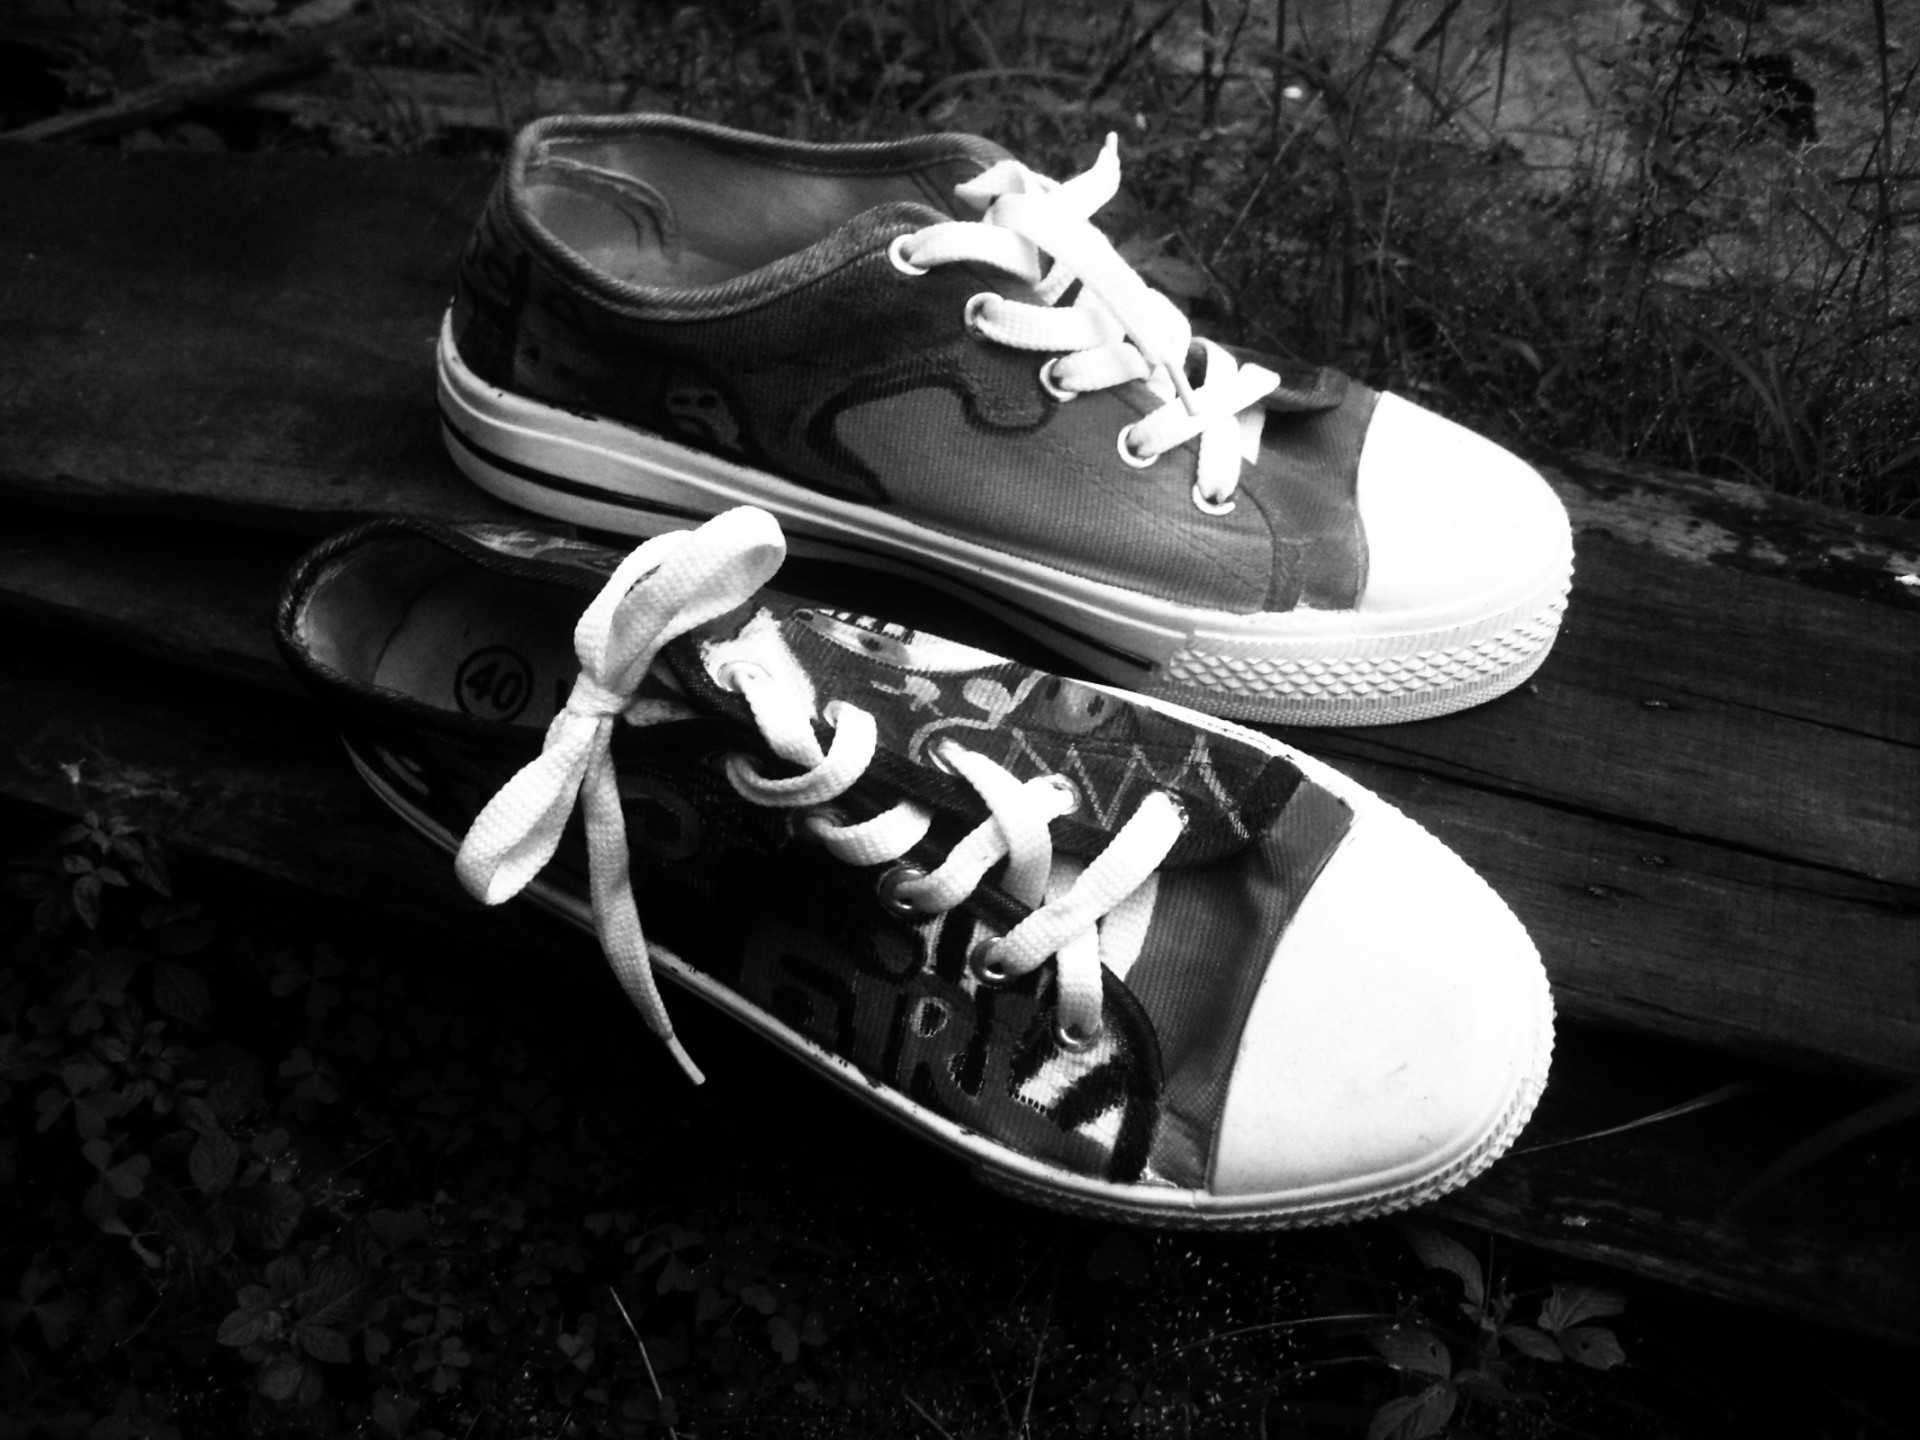 Painted Sneakers Bw